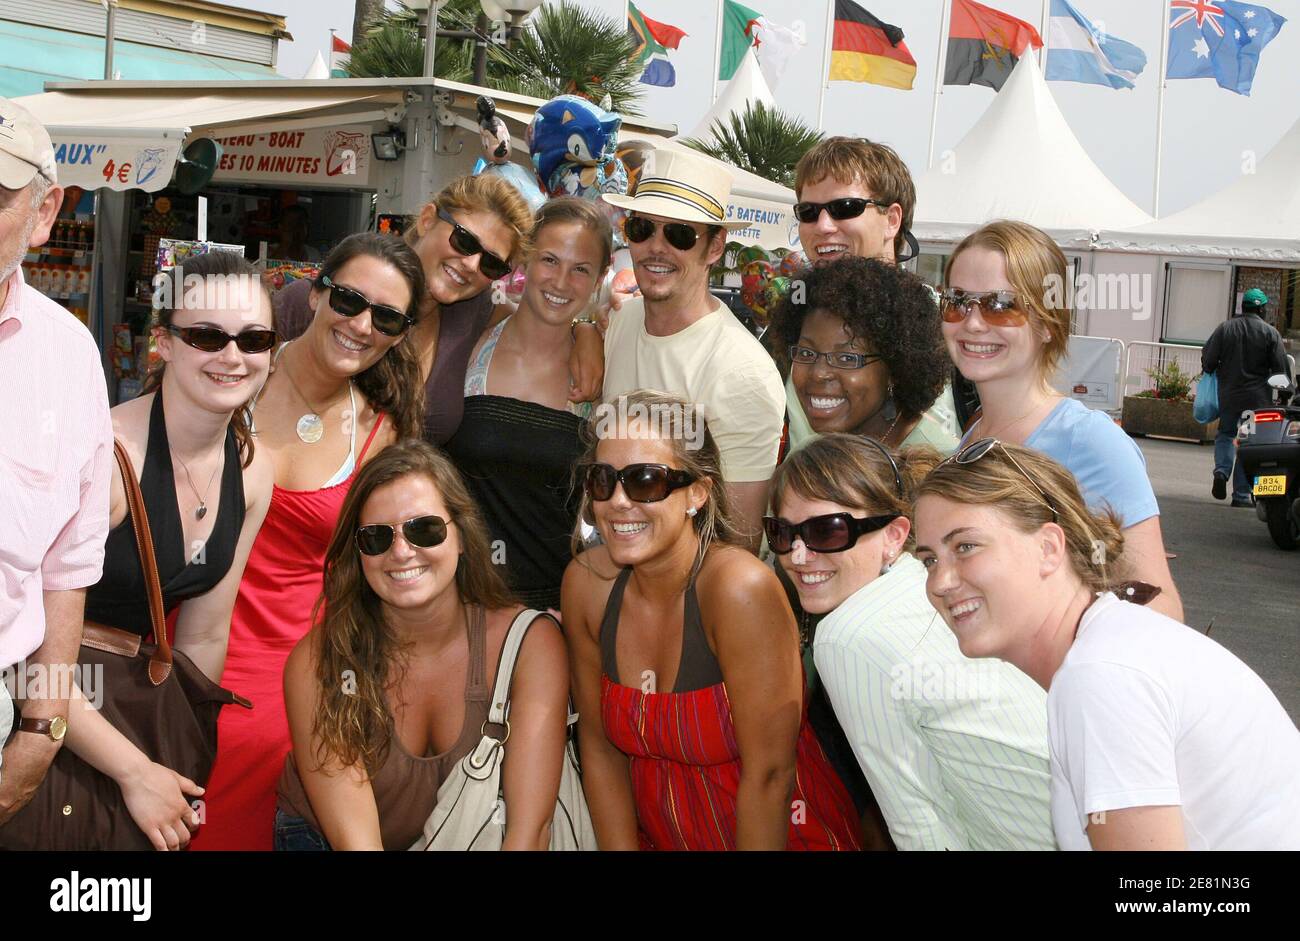 US actor Kevin Dillon (Matt Dillon's brother) poses with female friends on the Croisette while filming a scene for the HBO serie 'Entourage', during the 60th International Film Festival in Cannes, France, on May 25, 2007. Photo by Denis Guignebourg/ABACAPRESS.COM Stock Photo